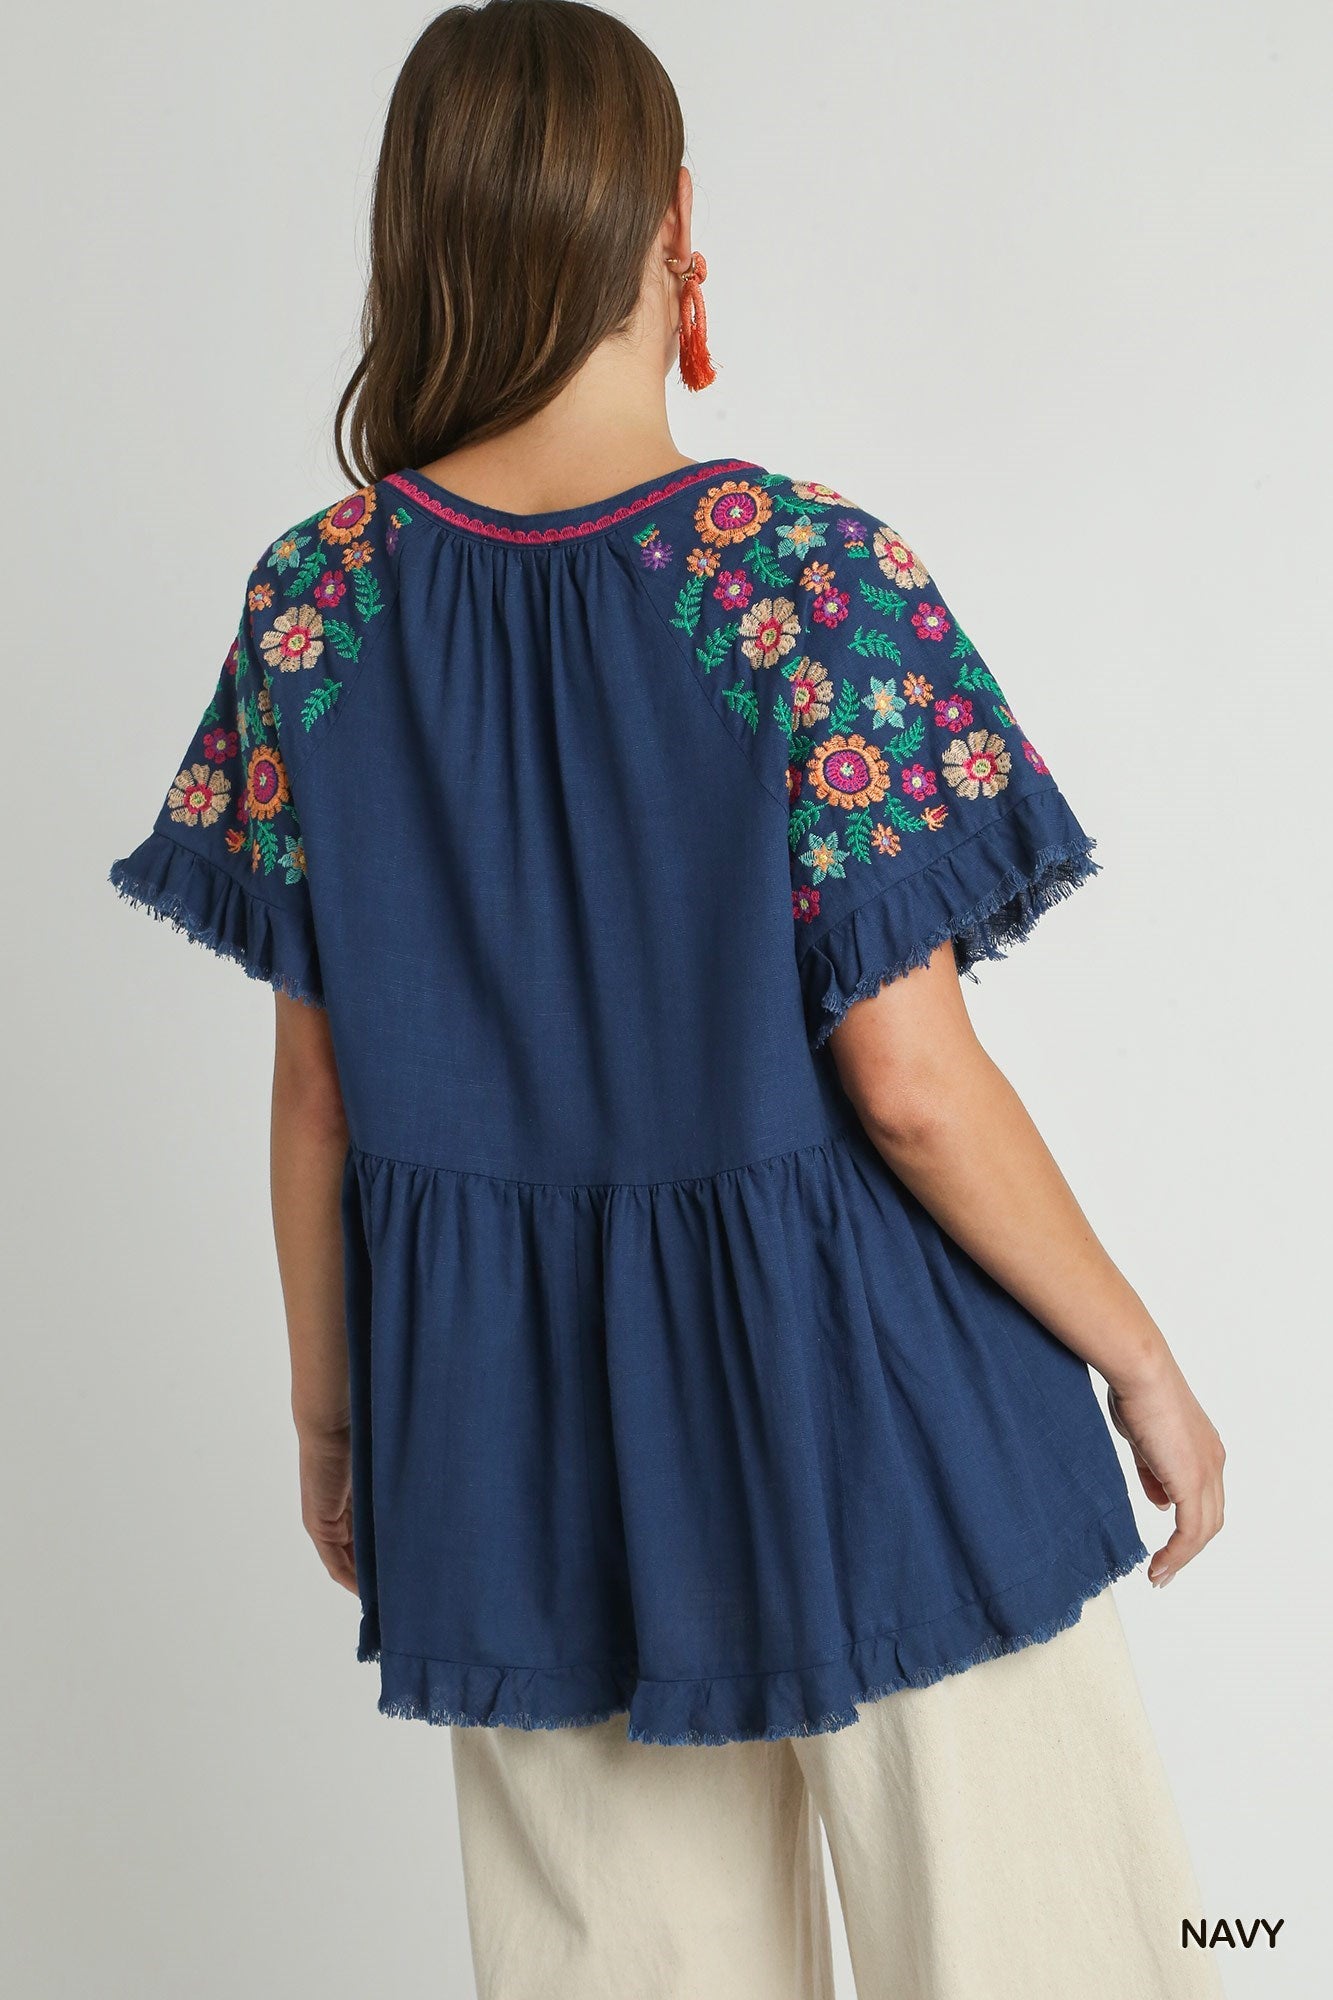 Baby Doll Split Neck Top with Embroidery Short Sleeve